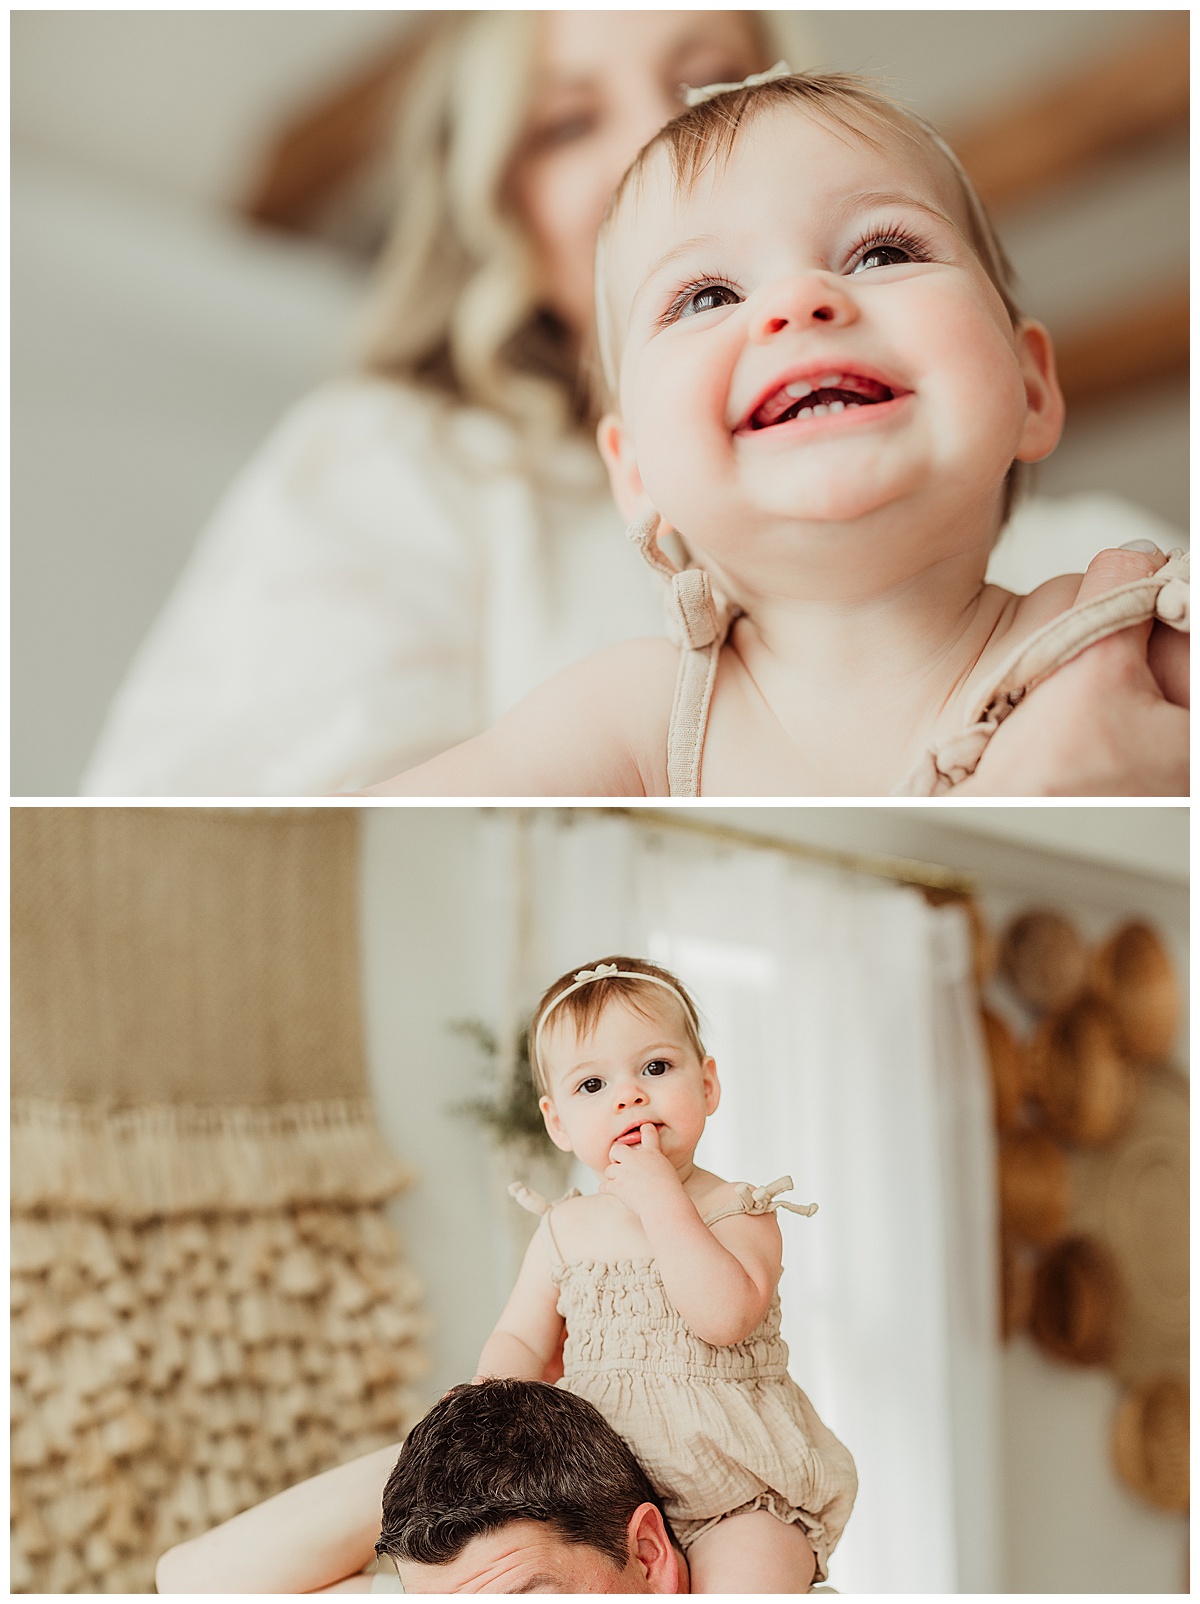 Baby girls shares smiles and laughs for Unposed Lifestyle Family Photos